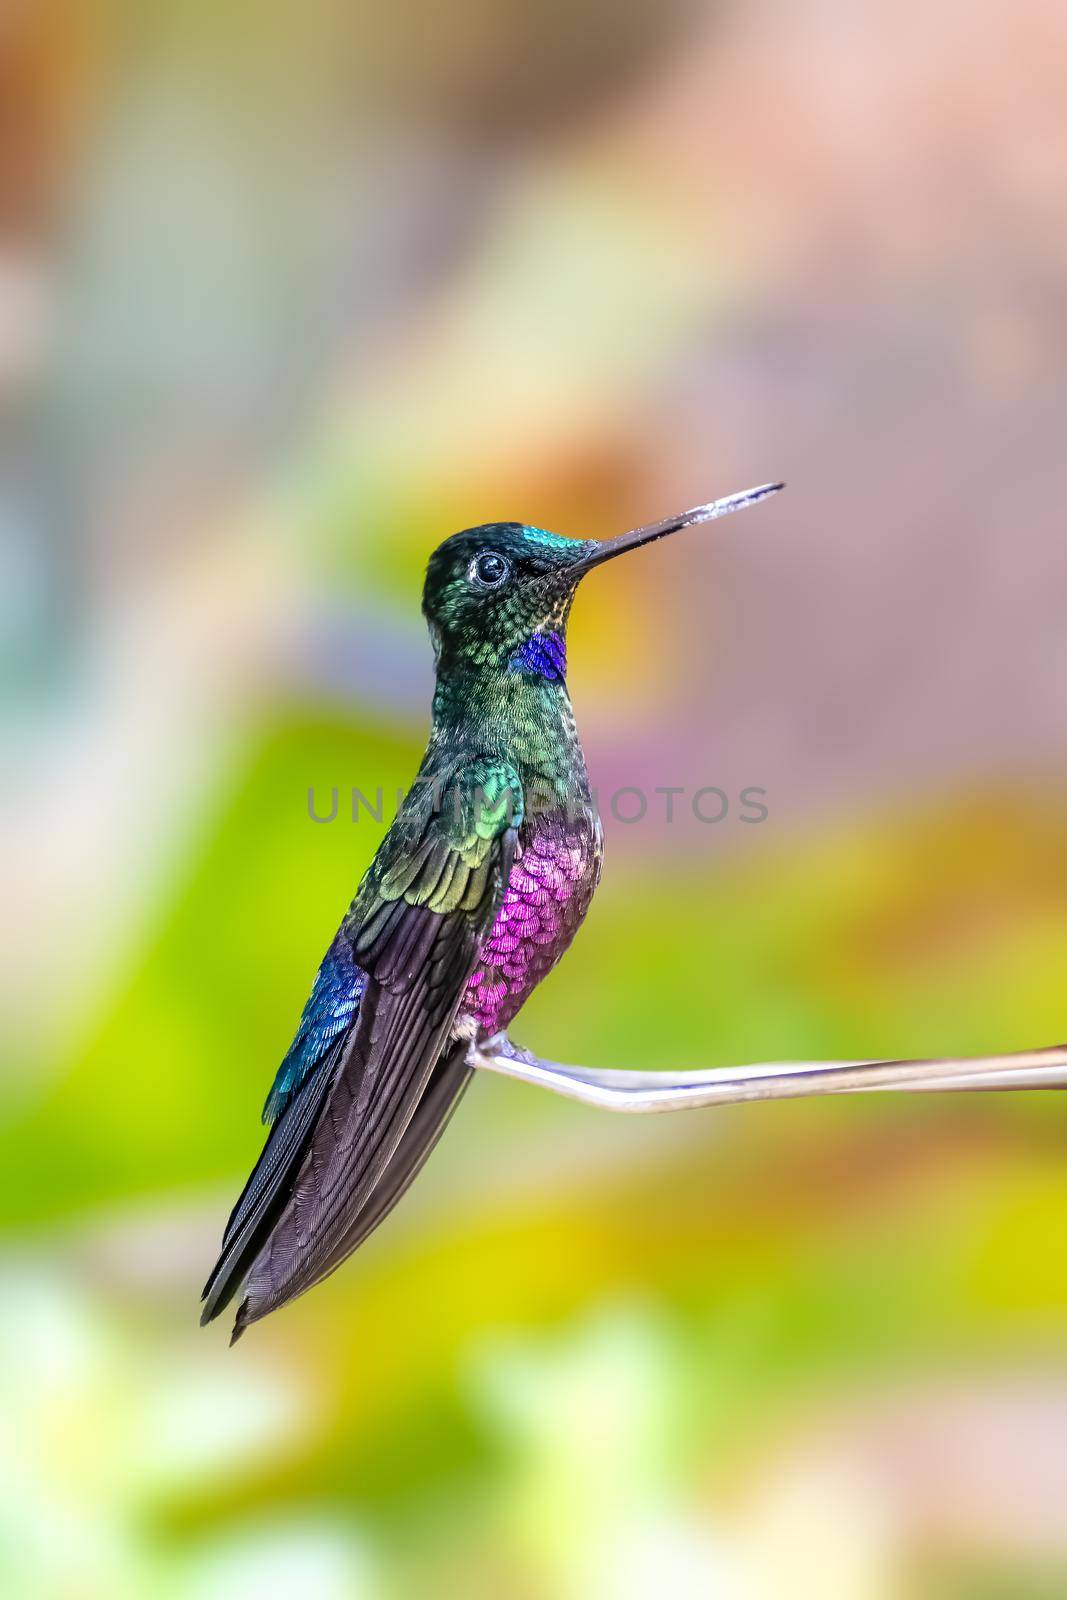 Blue throated star frontlet hummingbird in Columbia